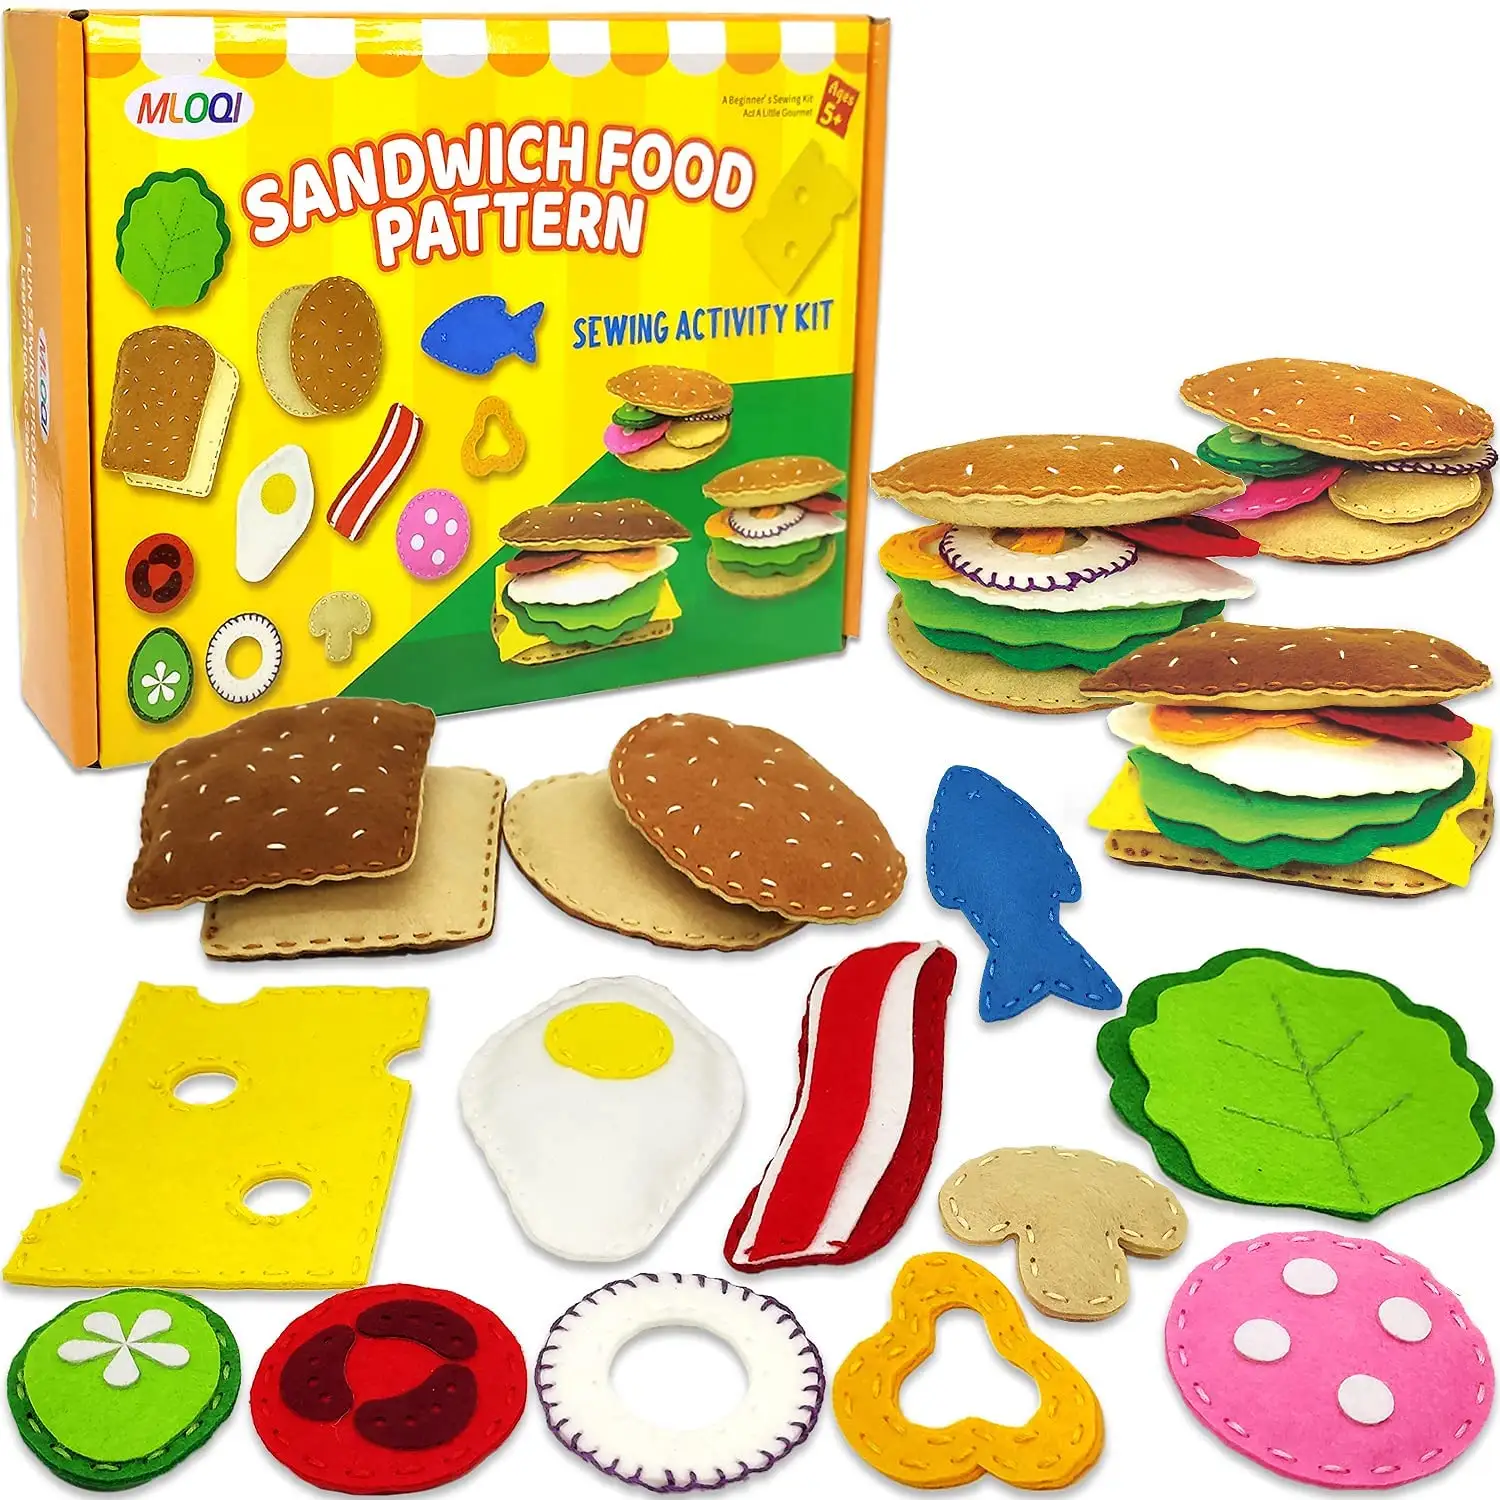 Pre Cut Felt Food Sandwich Arts and Crafts Set Sewing Kit with 15 Sewing DIY Activity Kits Project for Beginner Kids Sensory Toy